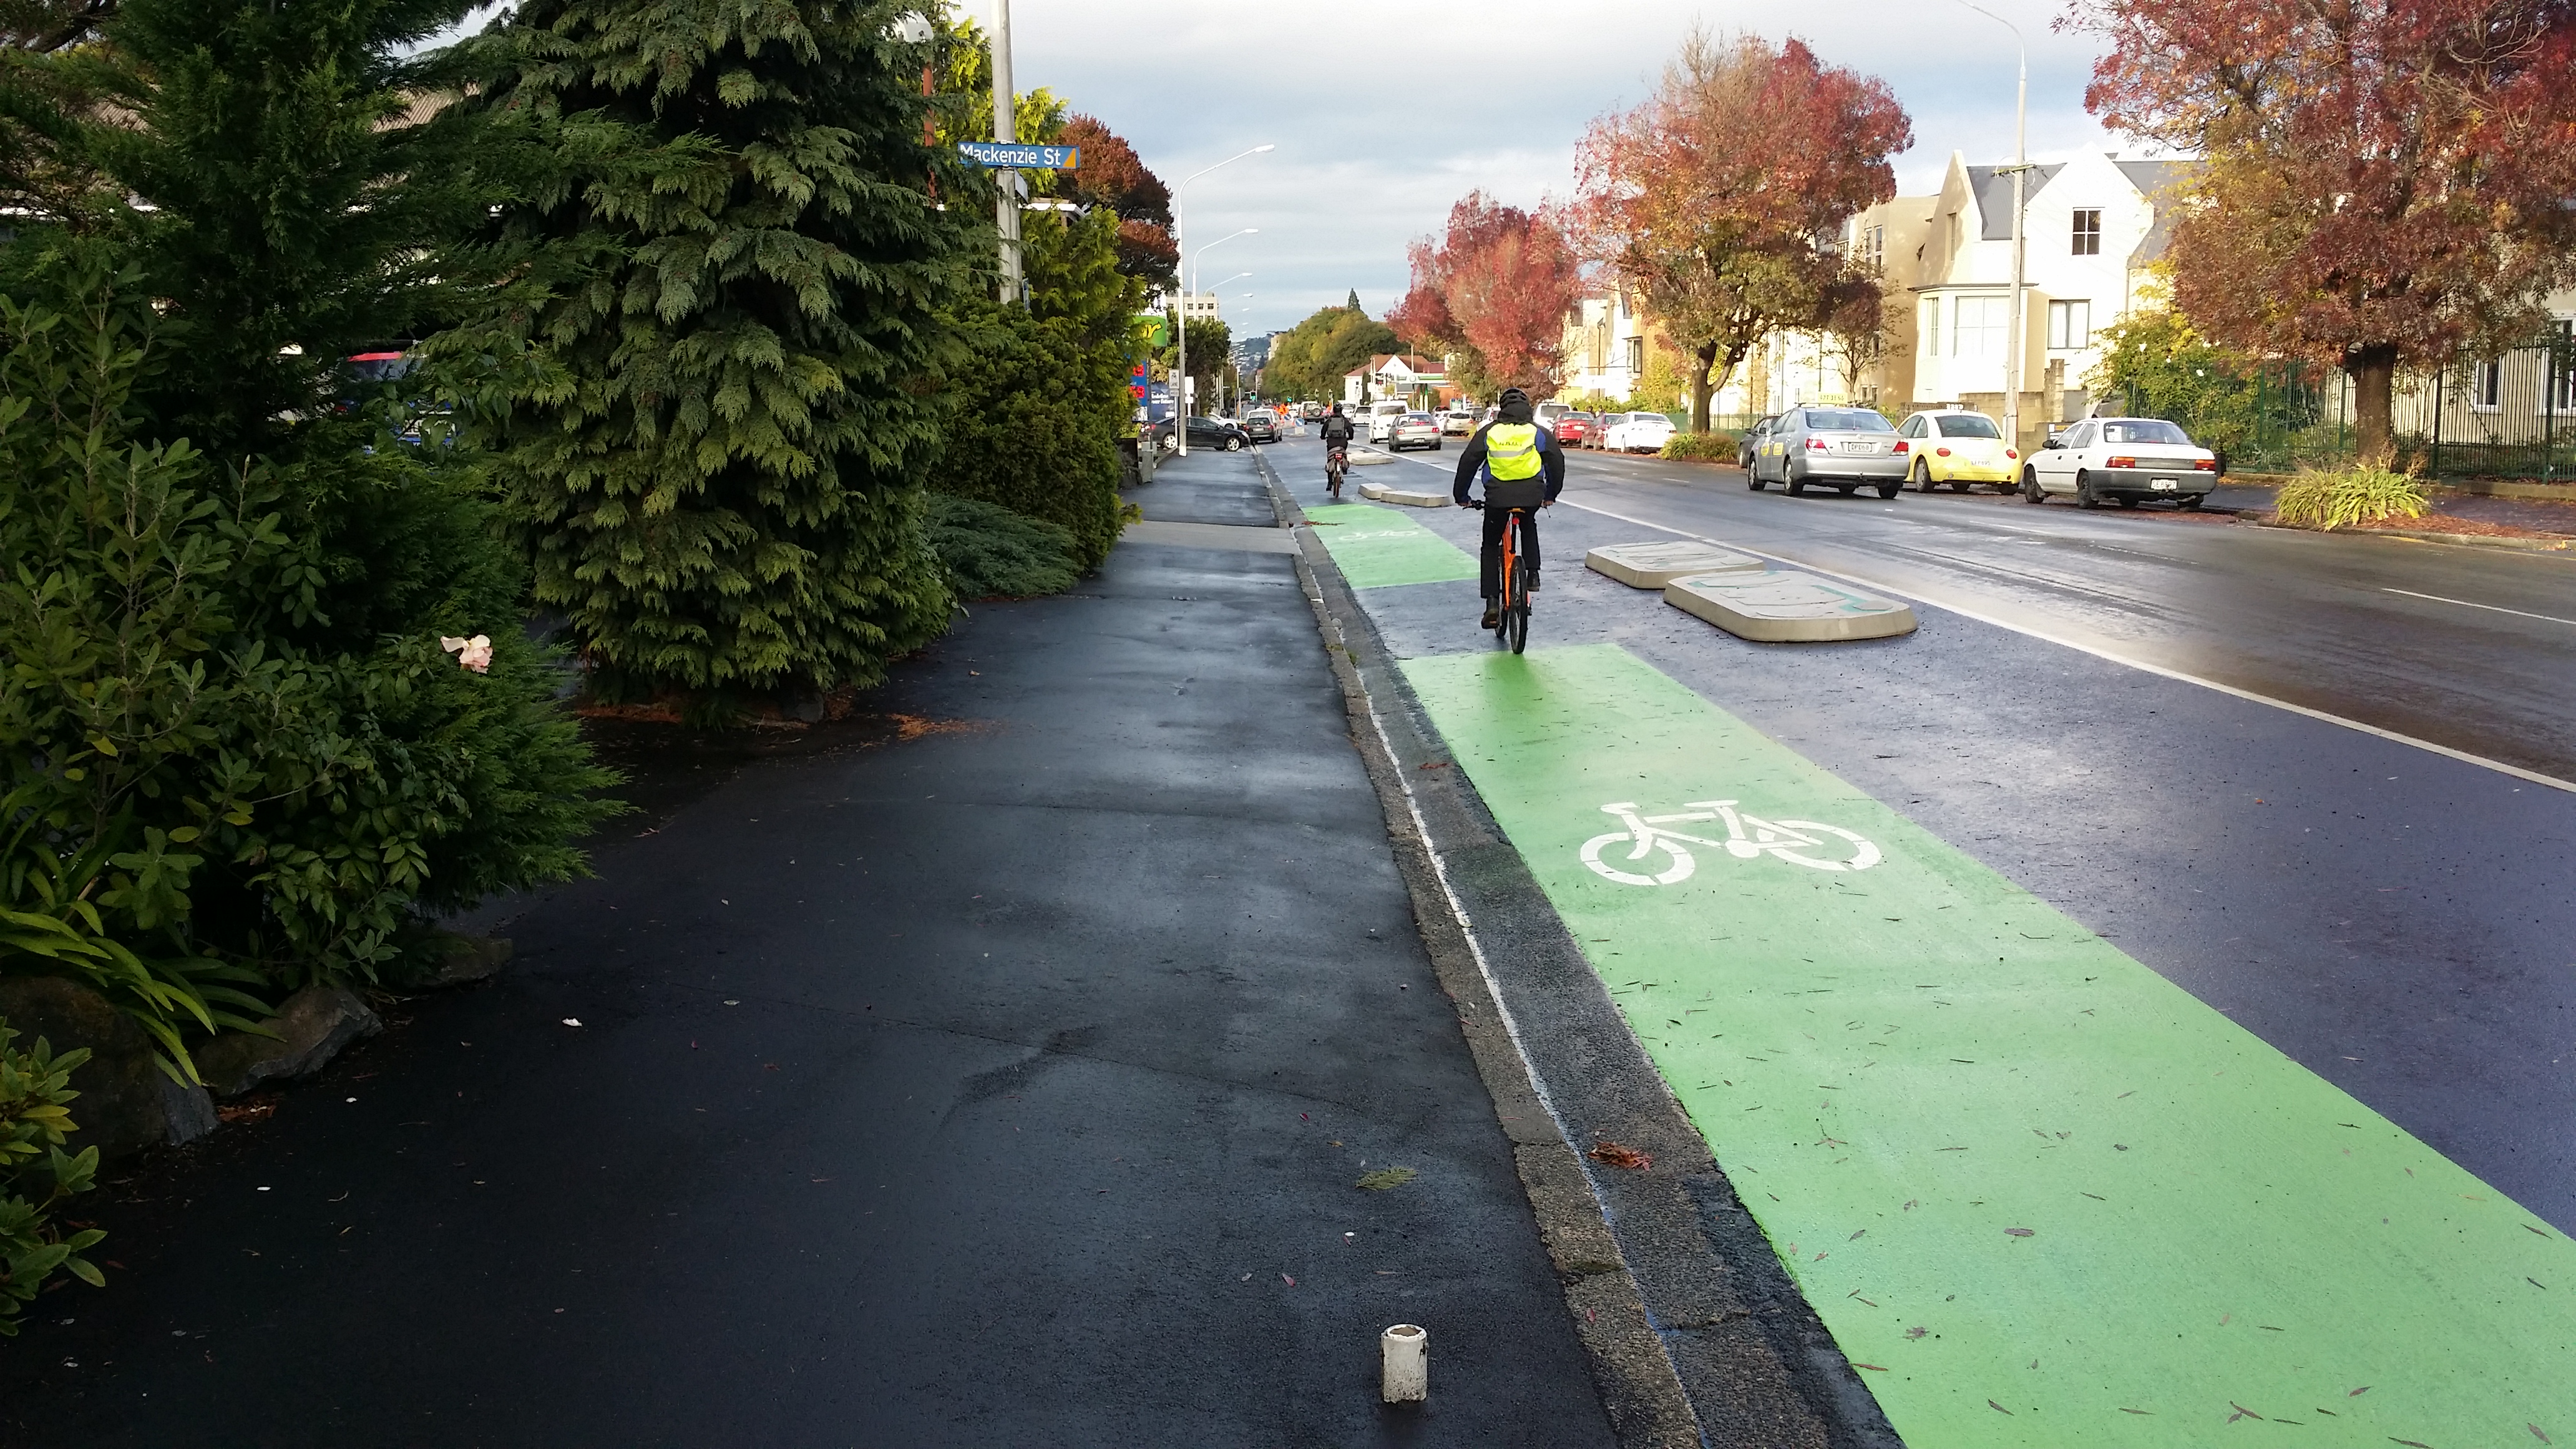 Separated cycle lane